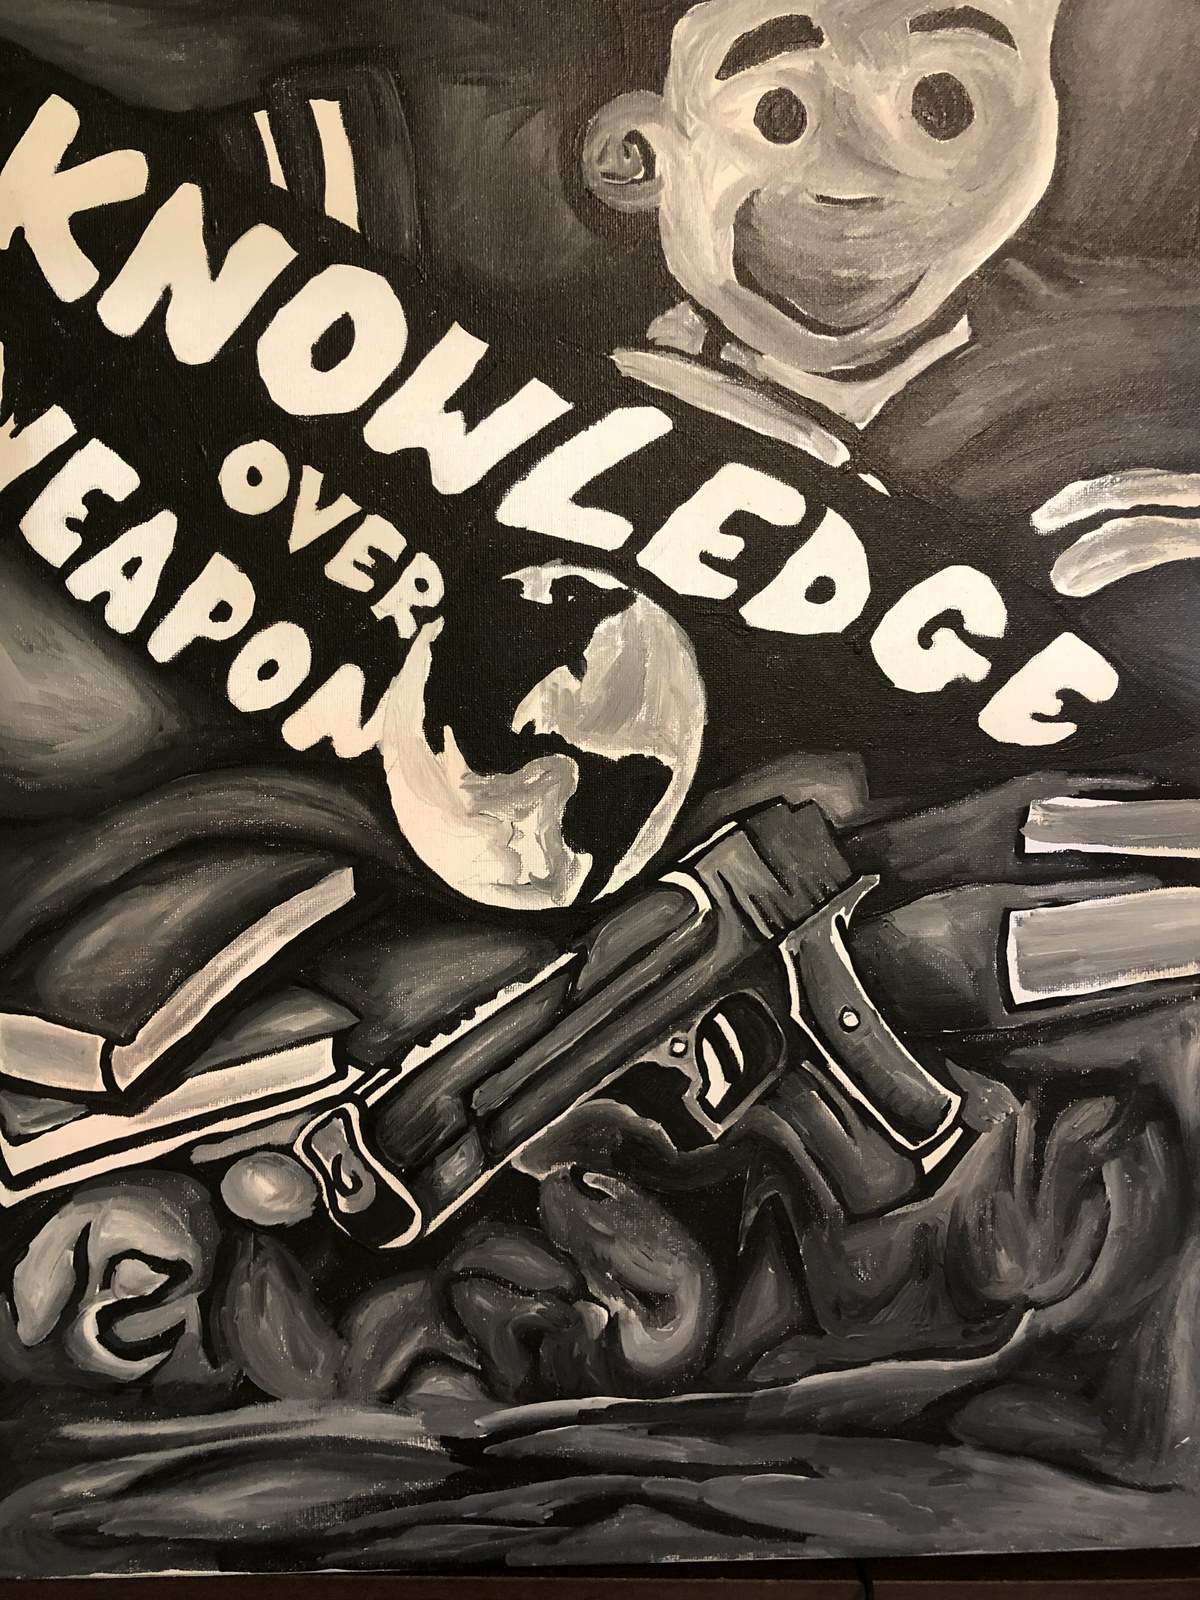 Rodney McAfee 2nd place
Middle College High School

This piece was inspired by my city,  the city of Memphis. All around Memphis is violence left and right. I wanted to deliver a positive message through my art, that can hopefully touch at least one 